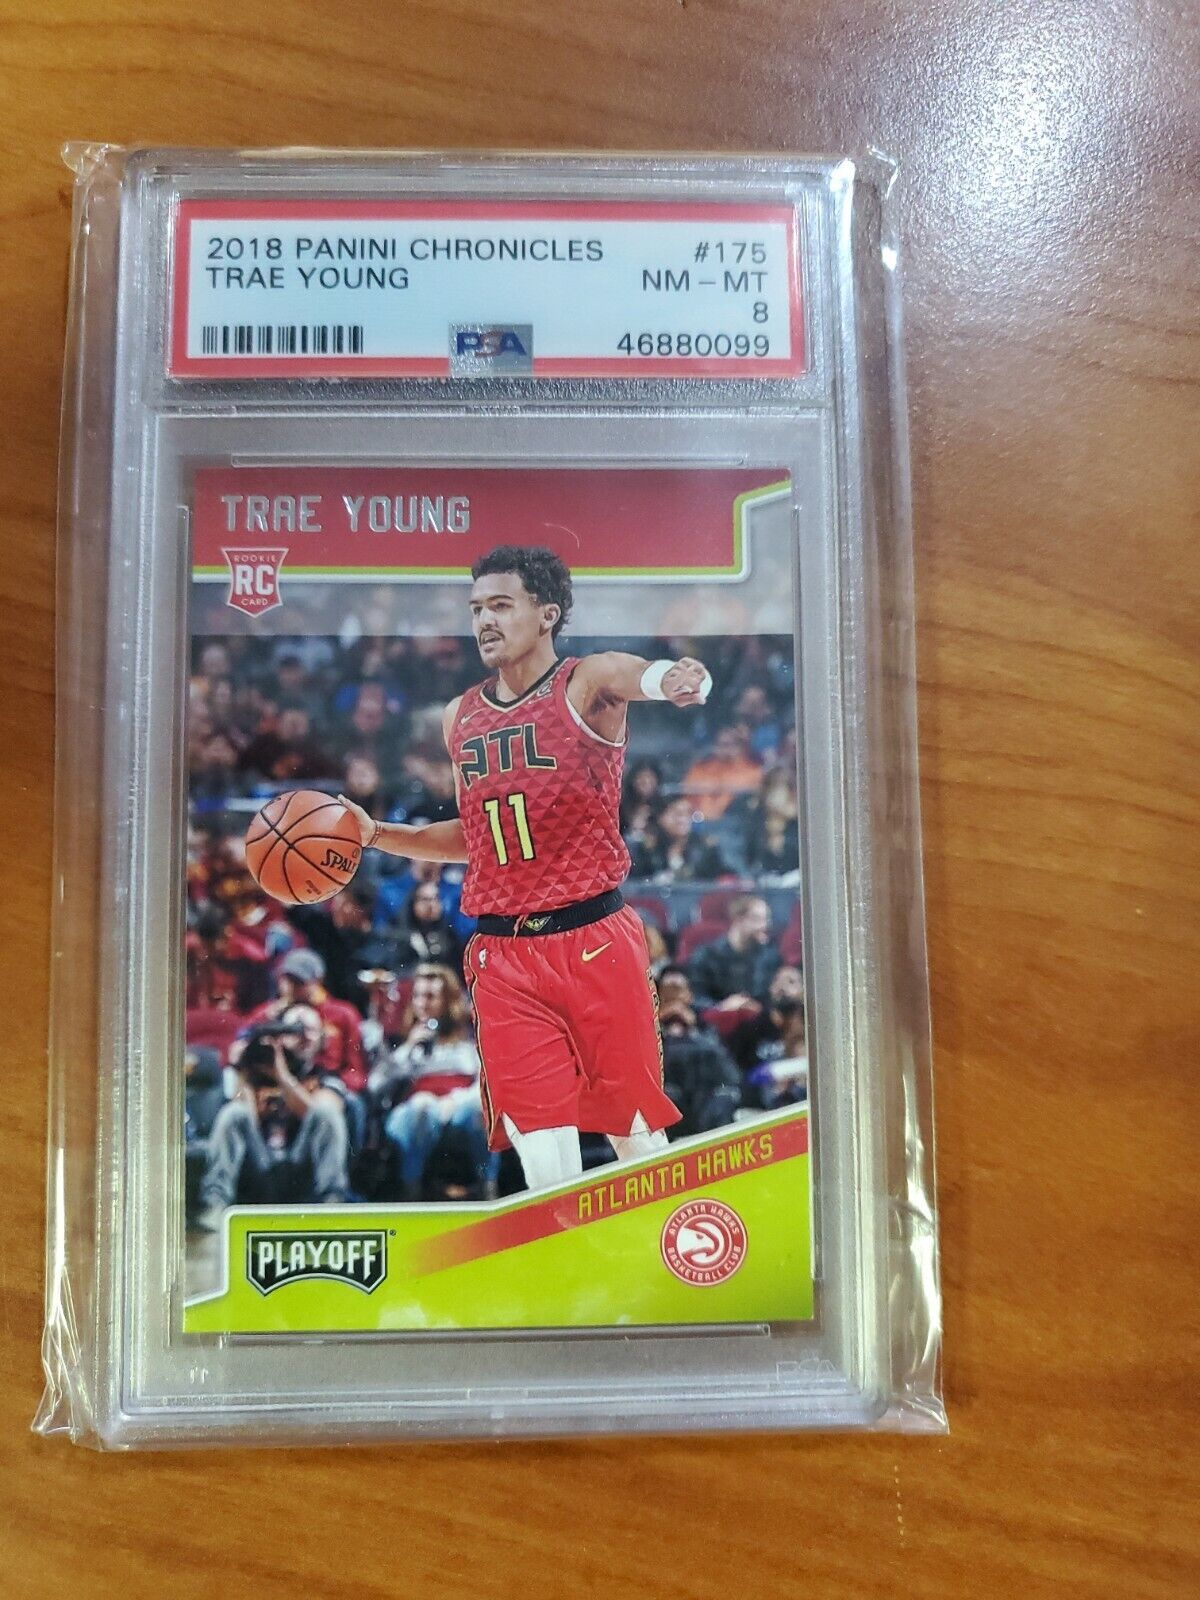 Trae Young 2018-19 Panini Chronicles #175 Playoff Rookie RC PSA 8